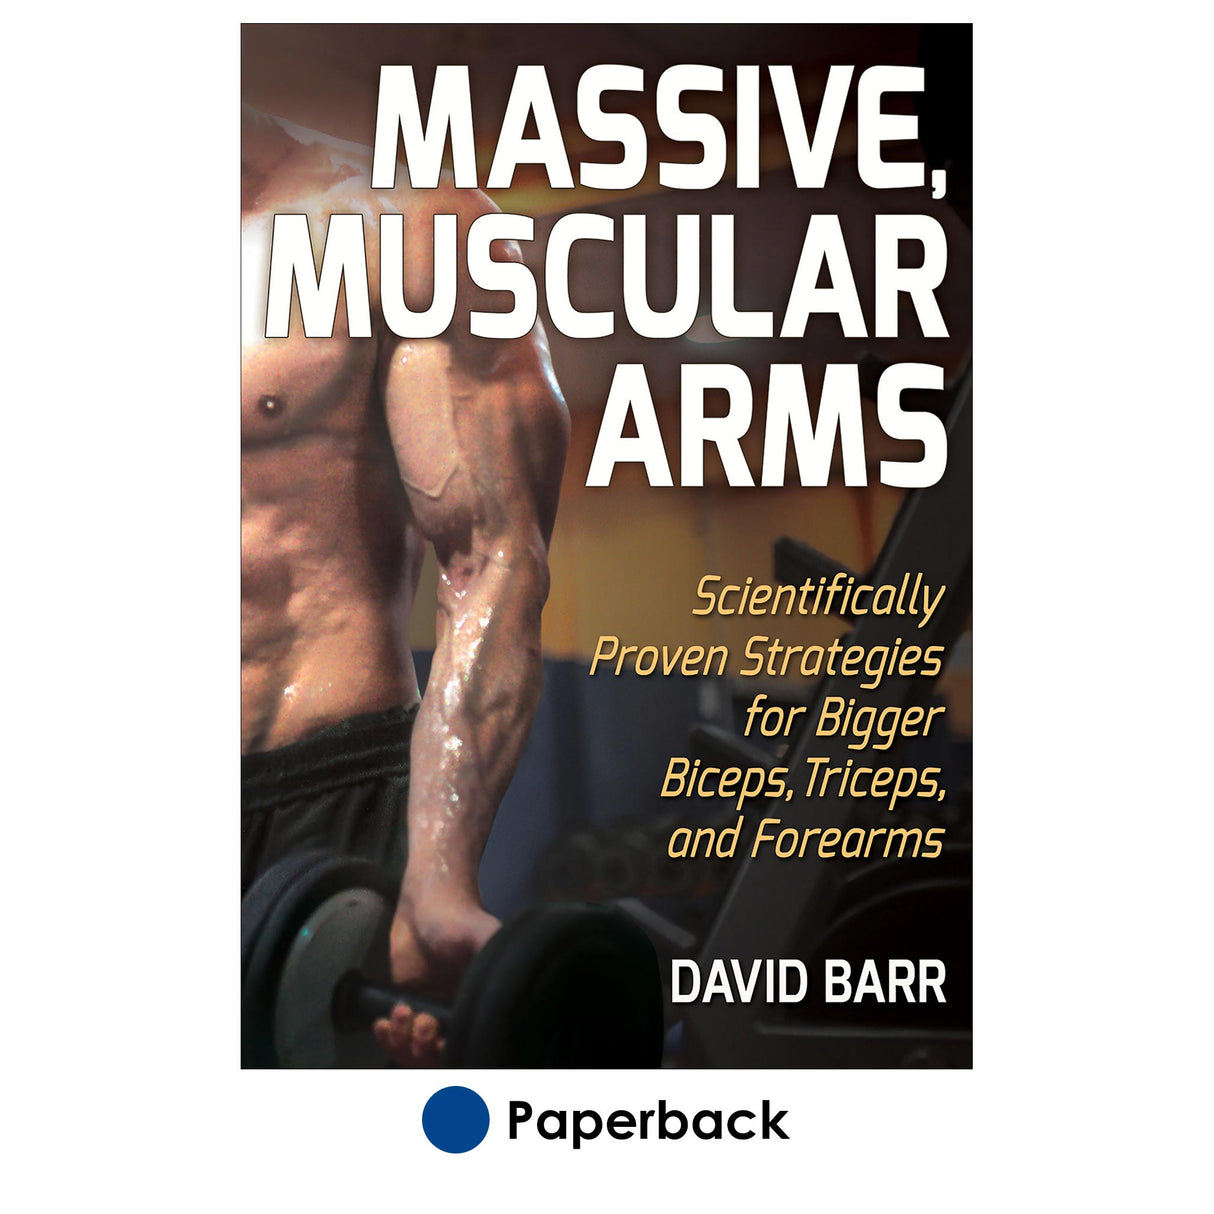 Massive, Muscular Arms